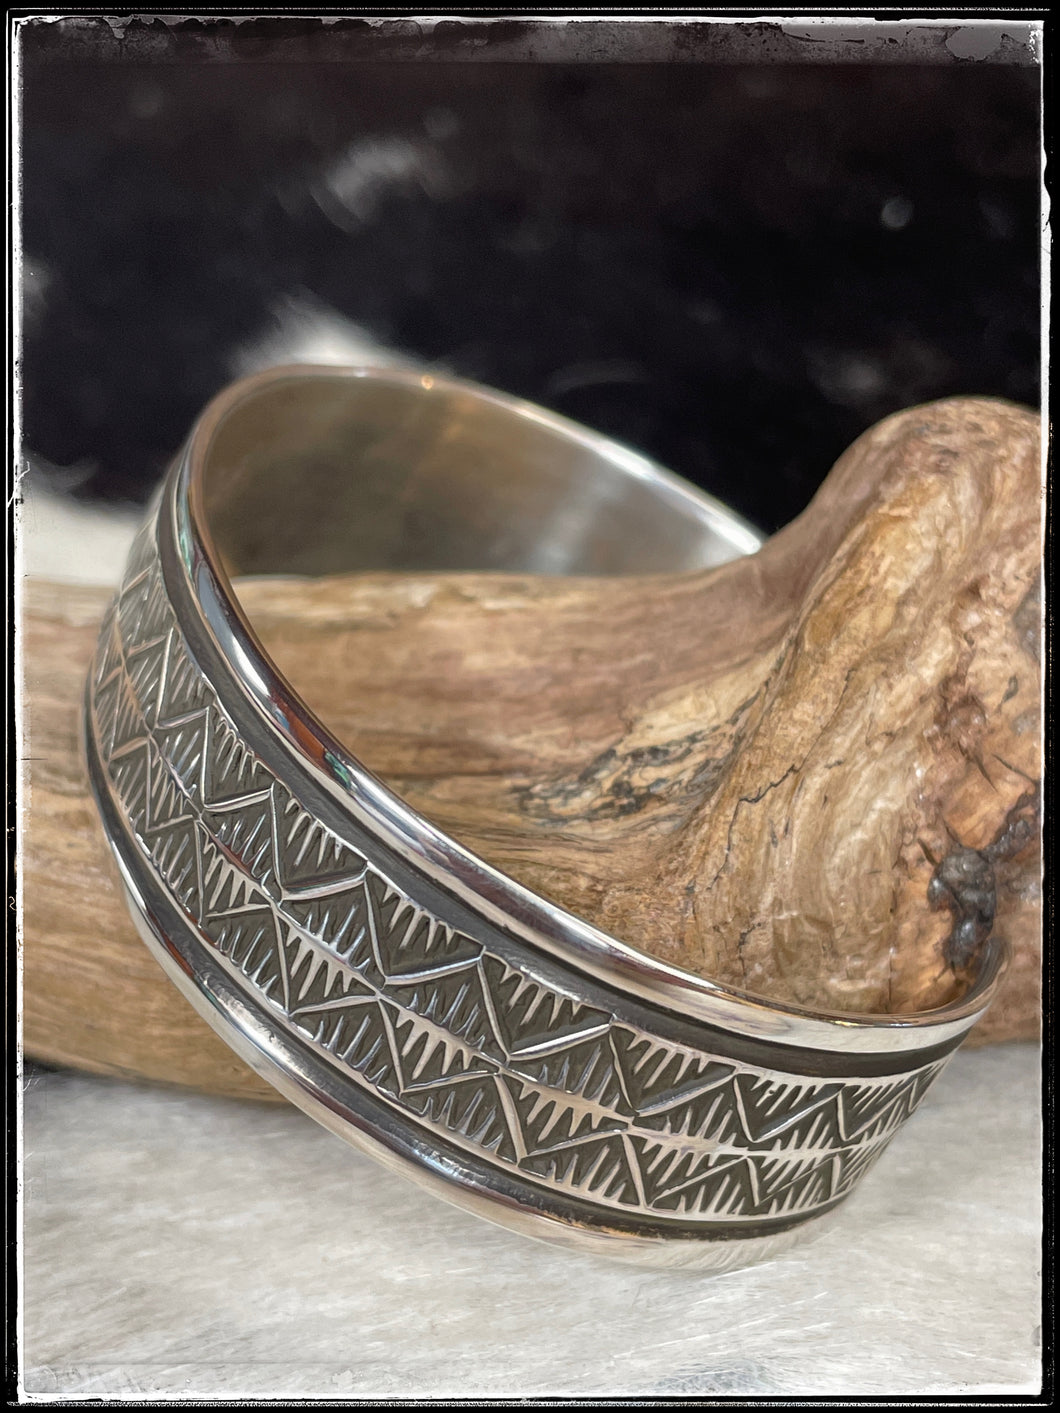 Adrian Reeves Long stamped sterling silver cuff